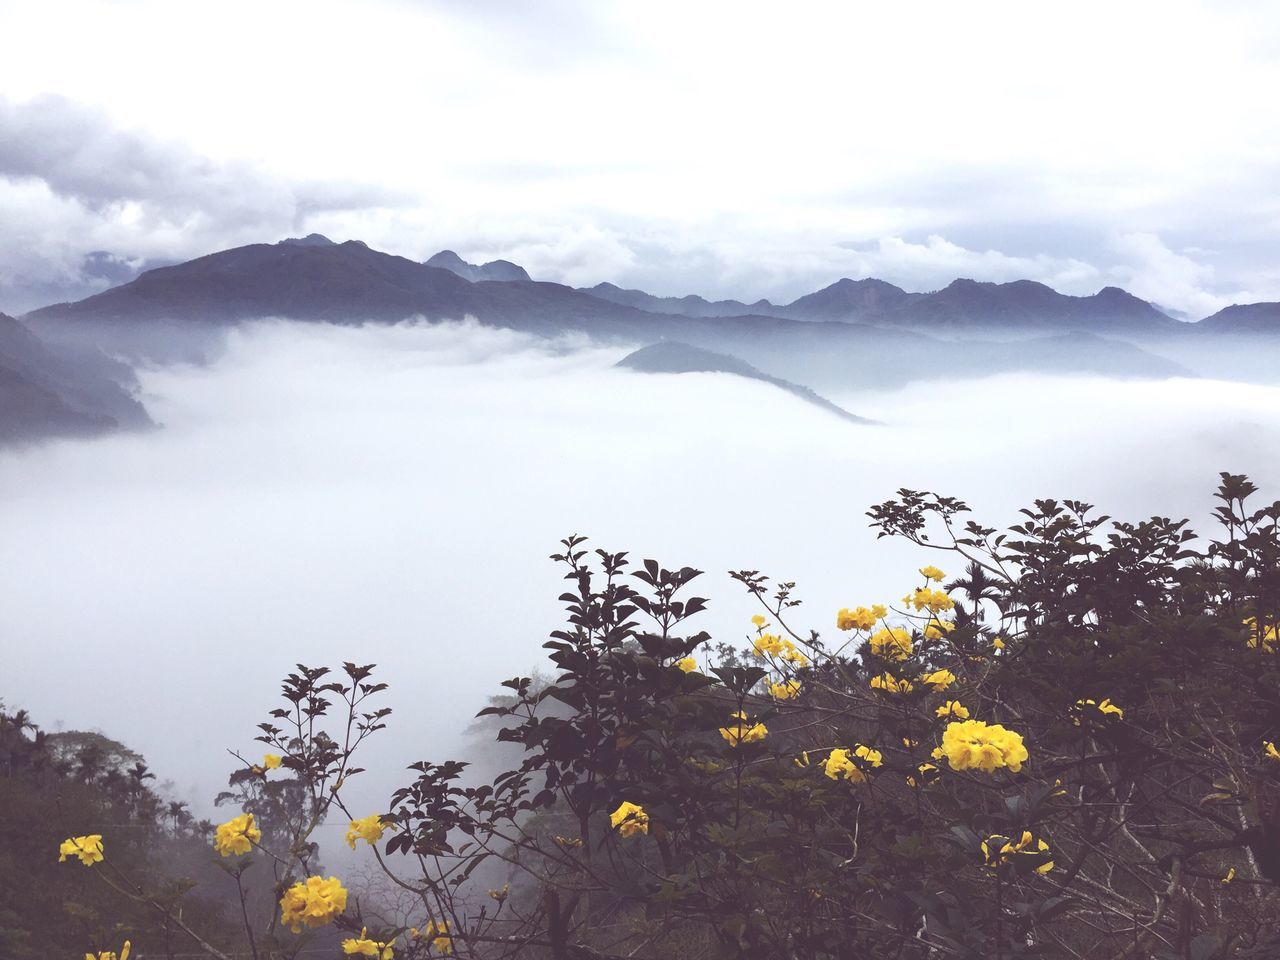 mountain, beauty in nature, flower, mountain range, sky, tranquil scene, scenics, tranquility, growth, nature, yellow, plant, landscape, cloud - sky, idyllic, freshness, cloud, non-urban scene, day, outdoors